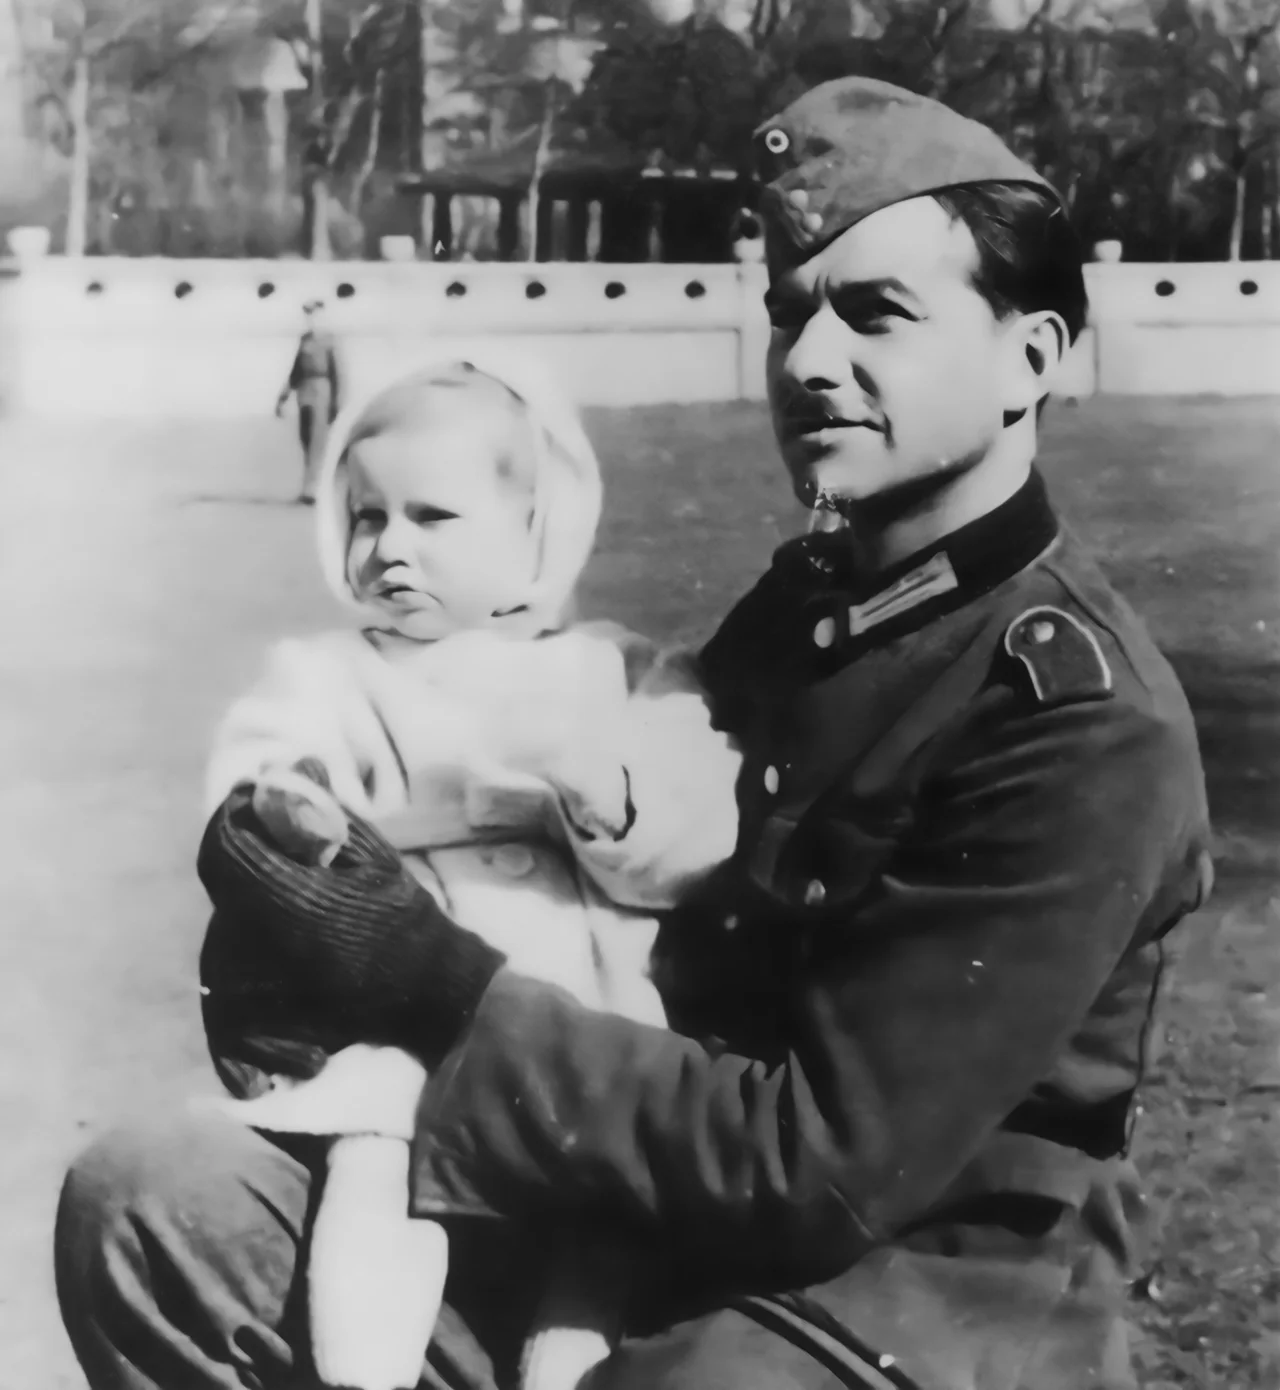 Hanns Scharff holding a child on his lap